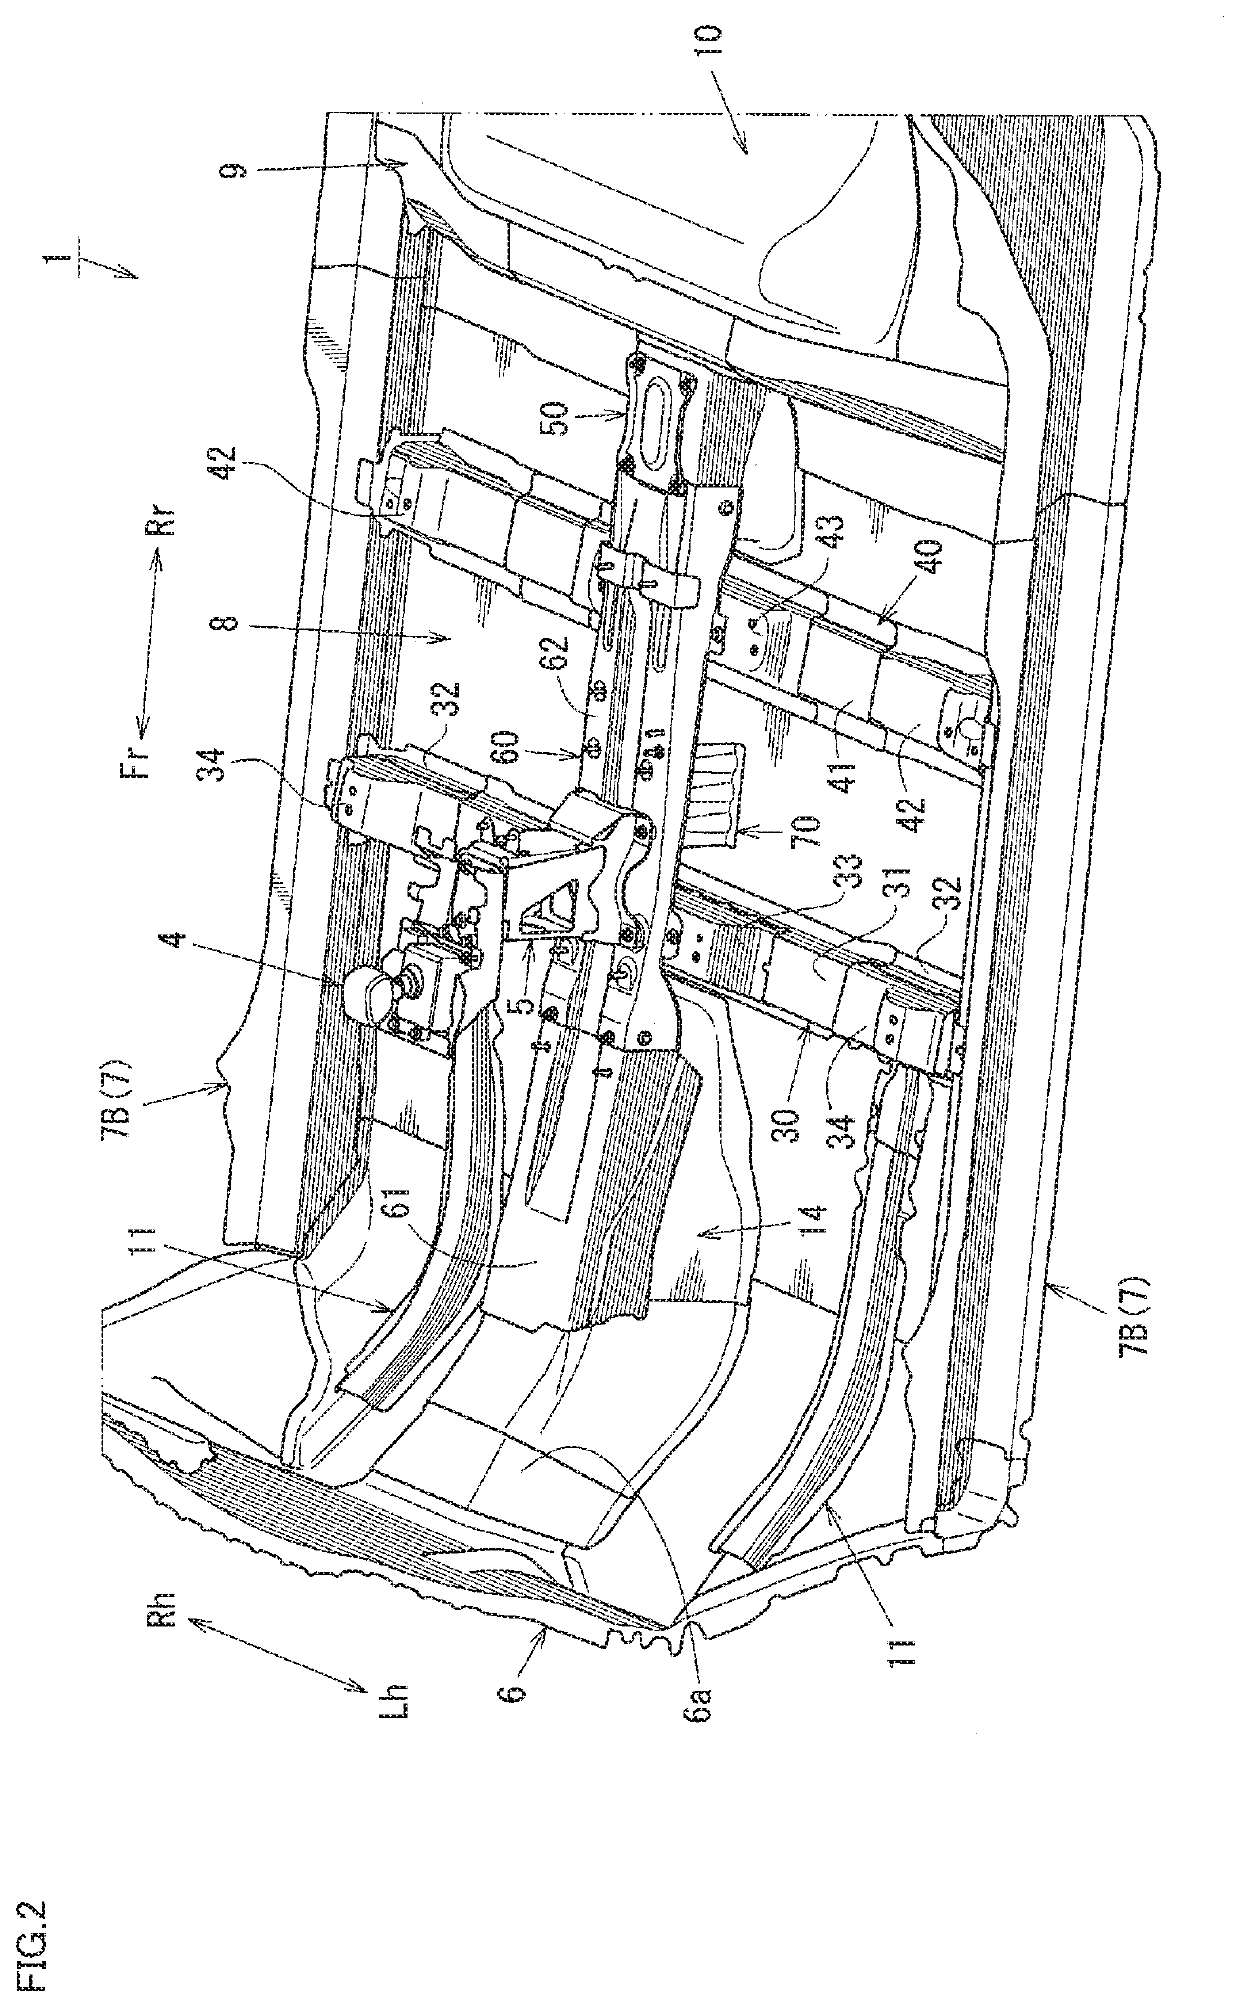 Lower vehicle-body structure of electric vehicle